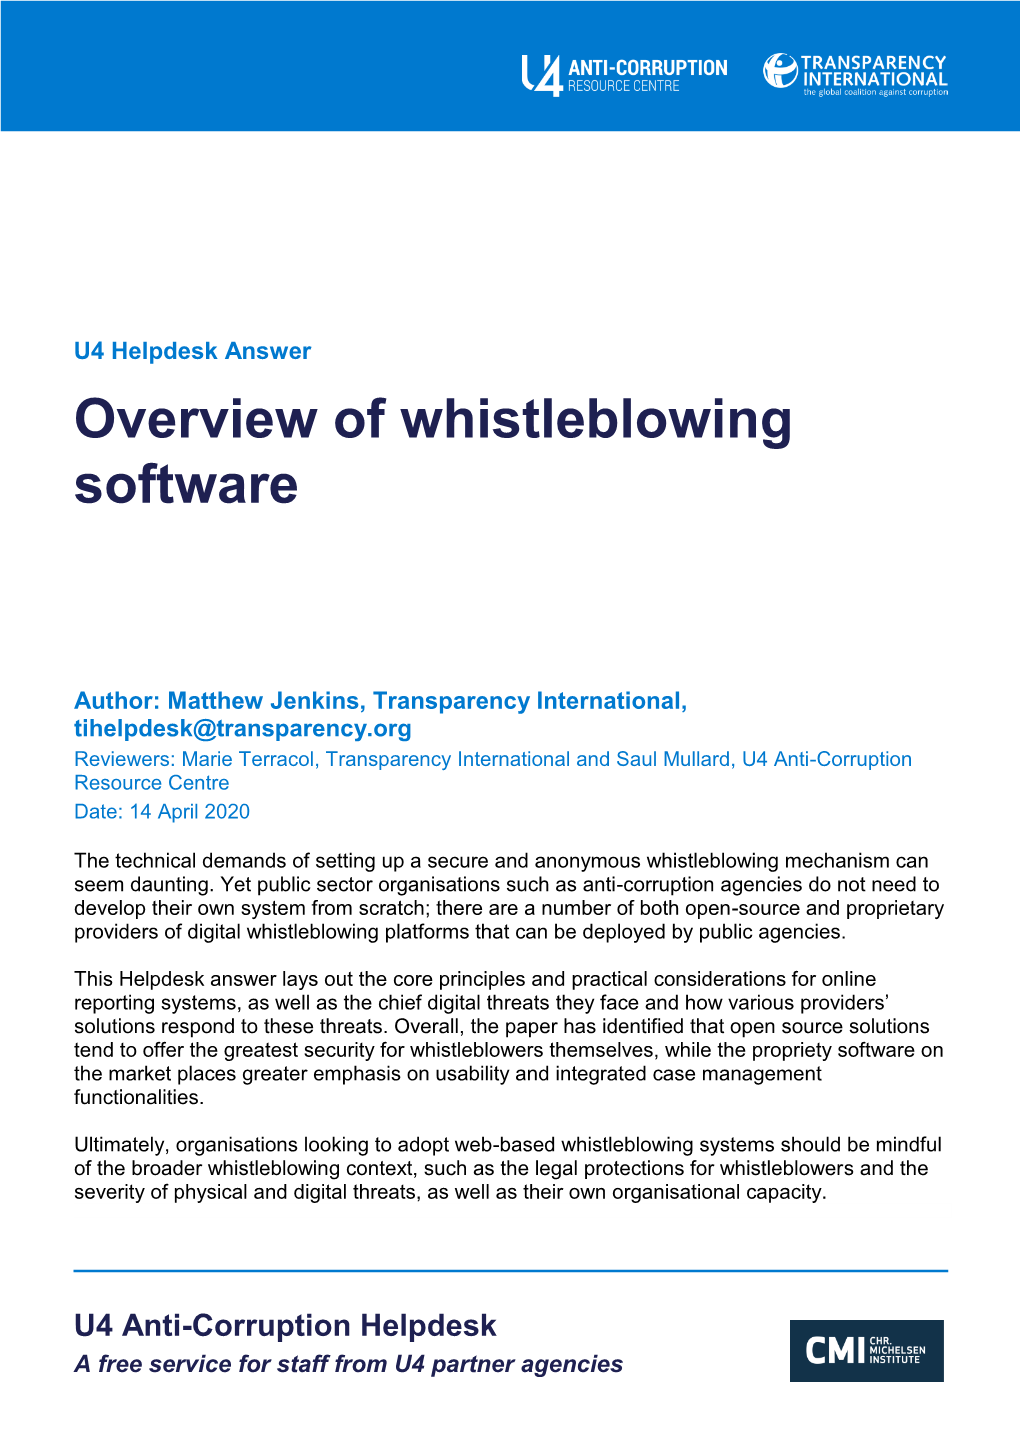 Overview of Whistleblowing Software